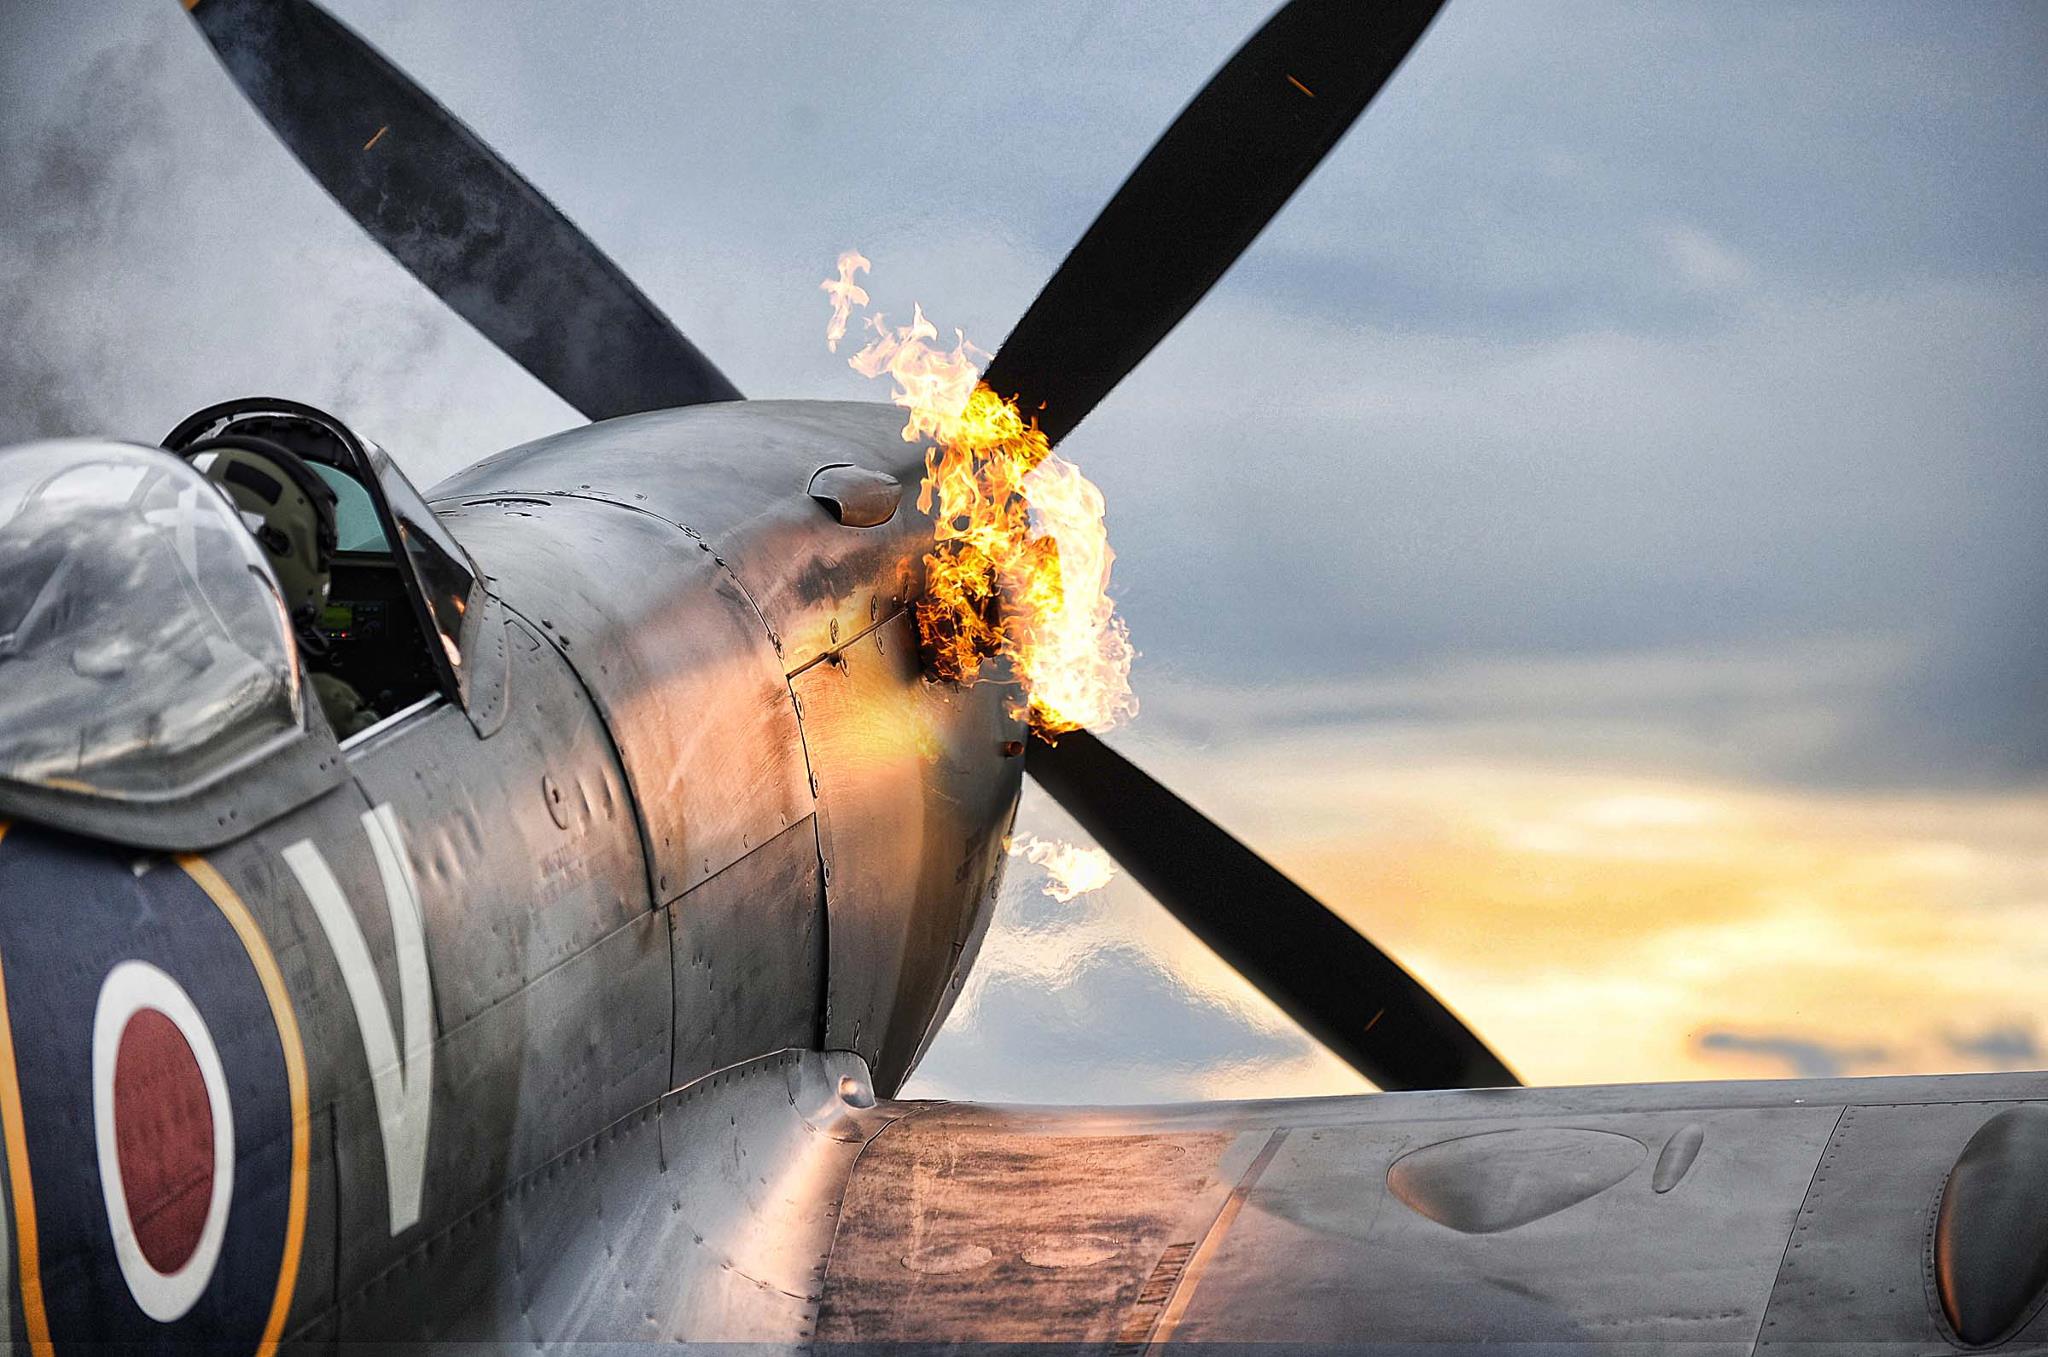 This Beautiful Image Shows A Wwii Era Spitfire Starting Its V